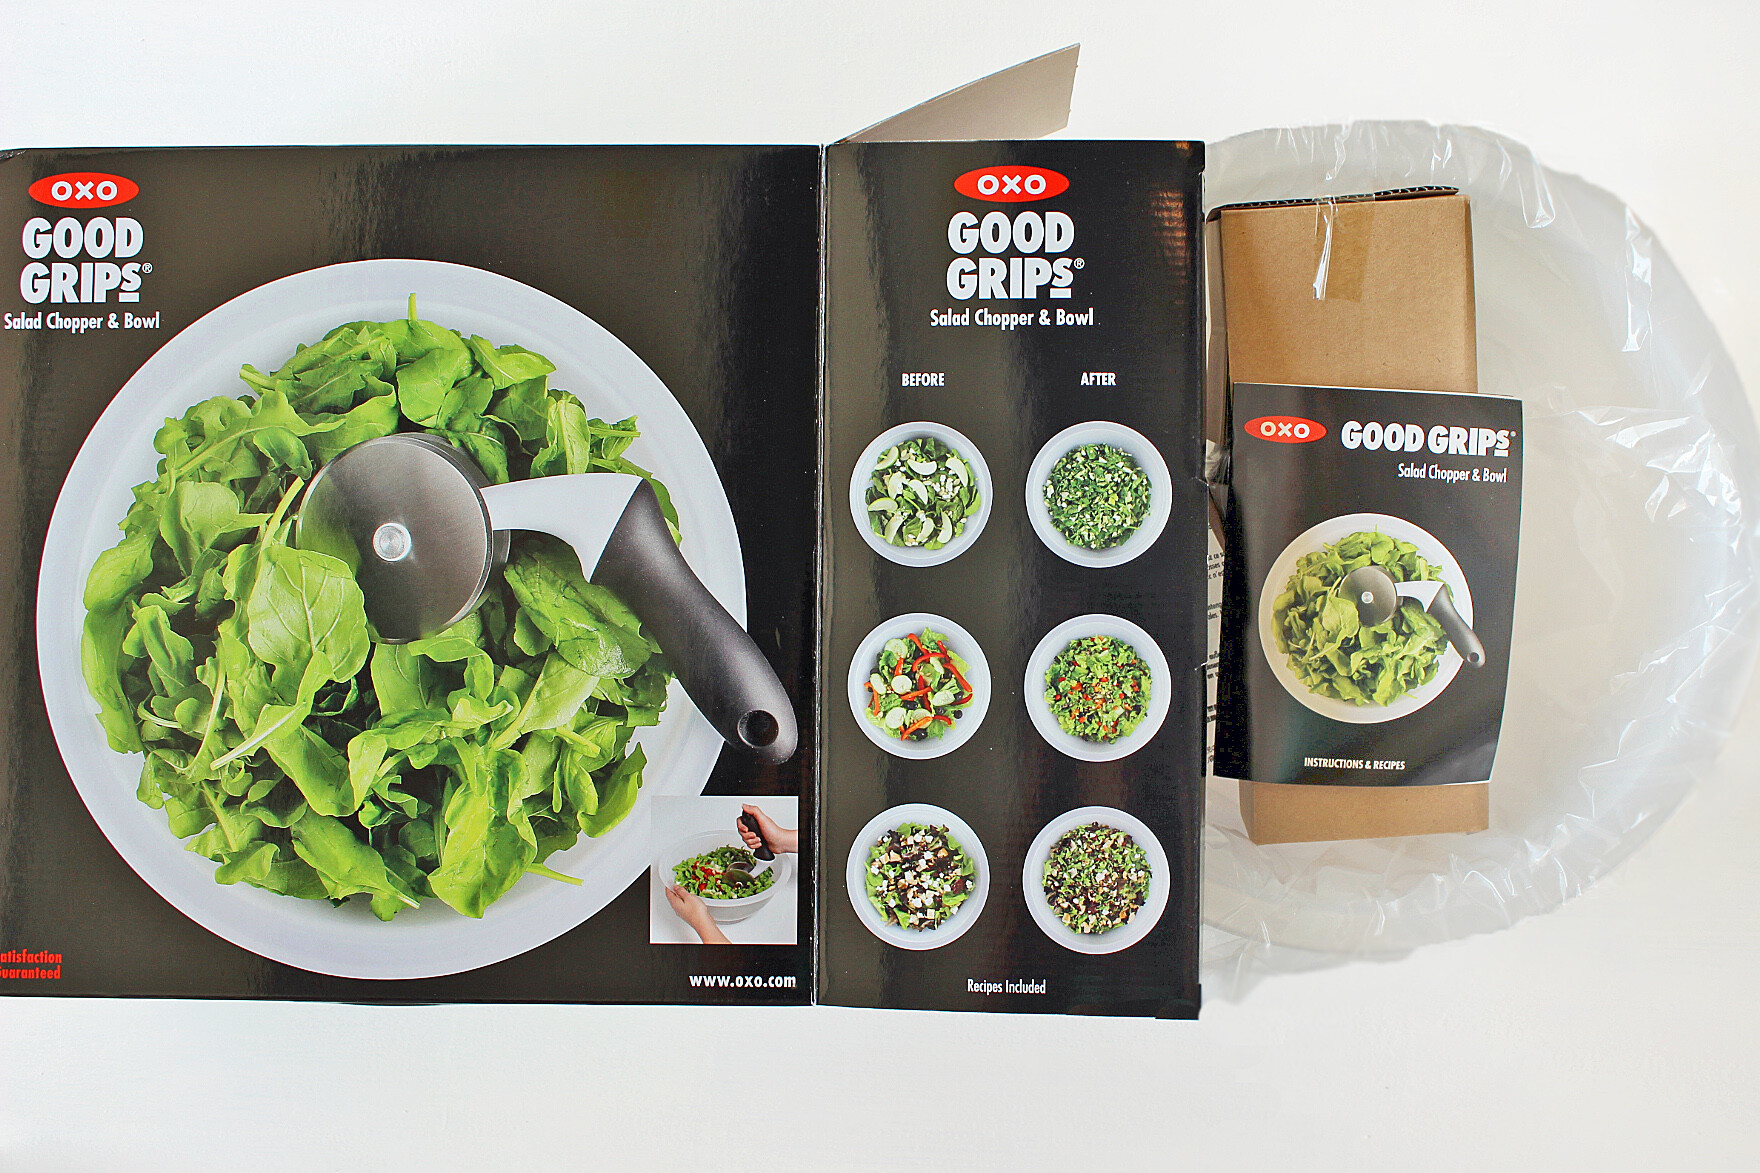 PRODUCT REVIEW: OXO SALAD CHOPPER AND BOWL